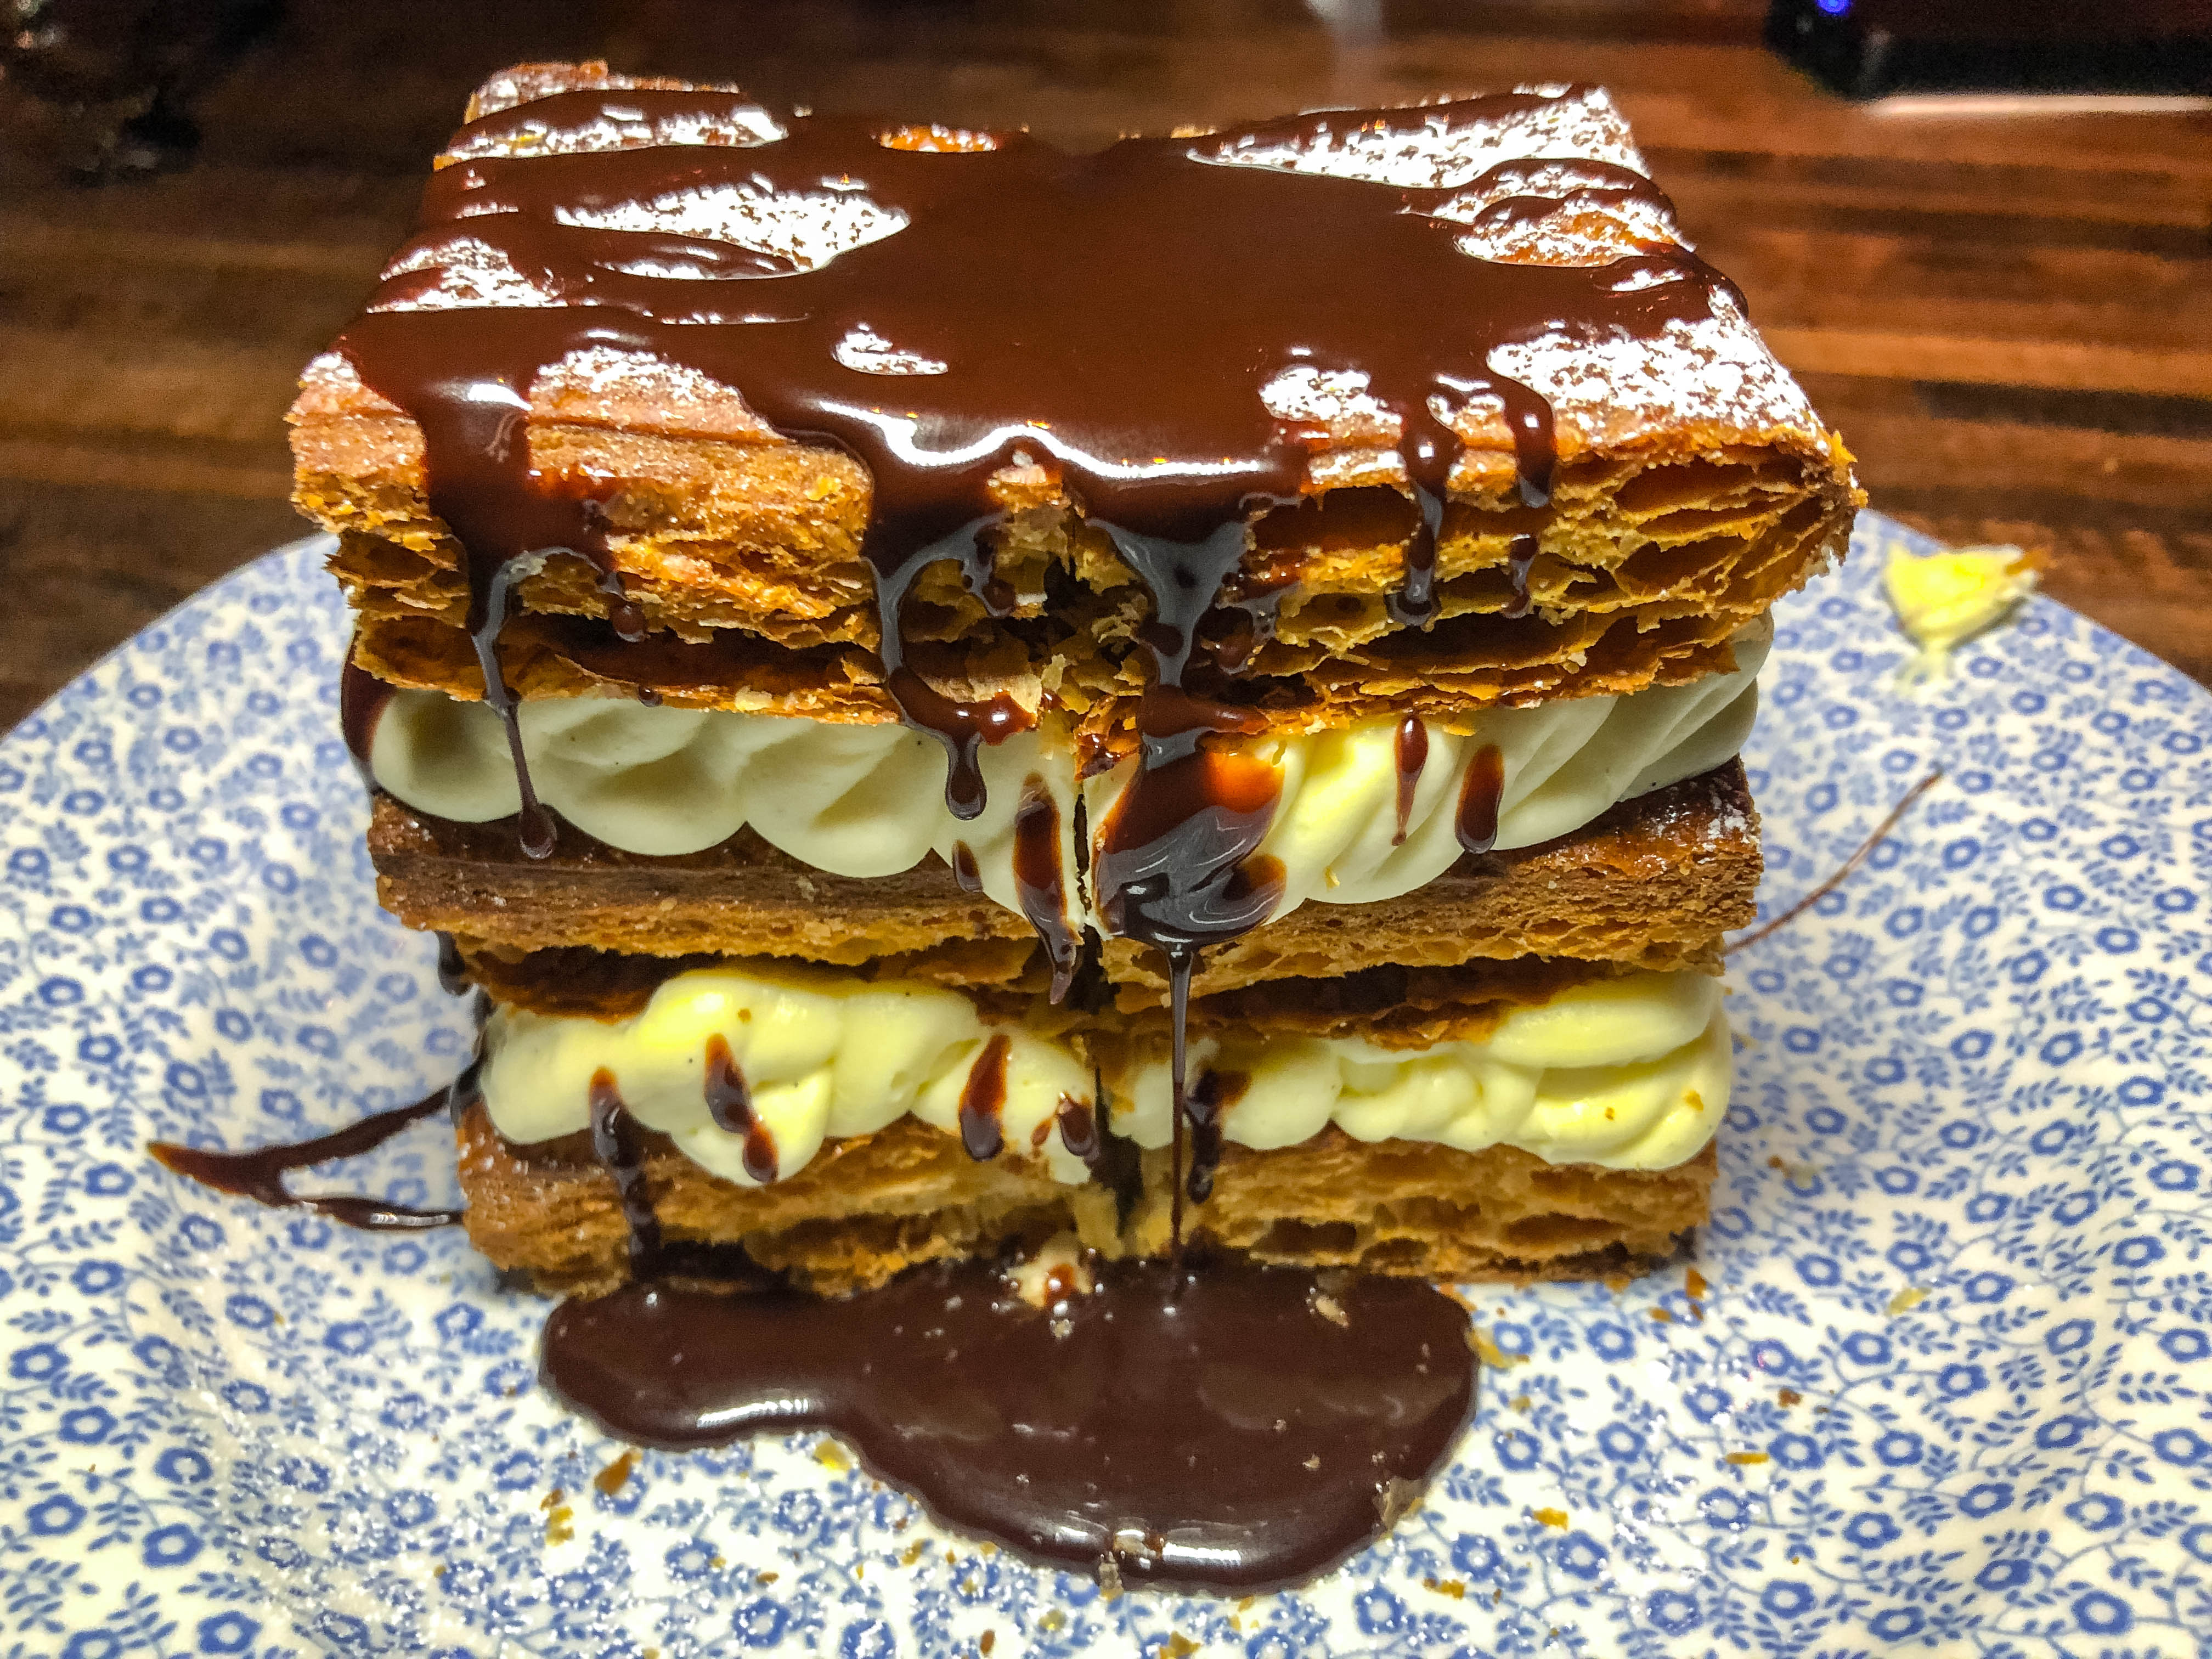 Mille Feuille - Picture of Au Cheval, Chicago - Tripadvisor